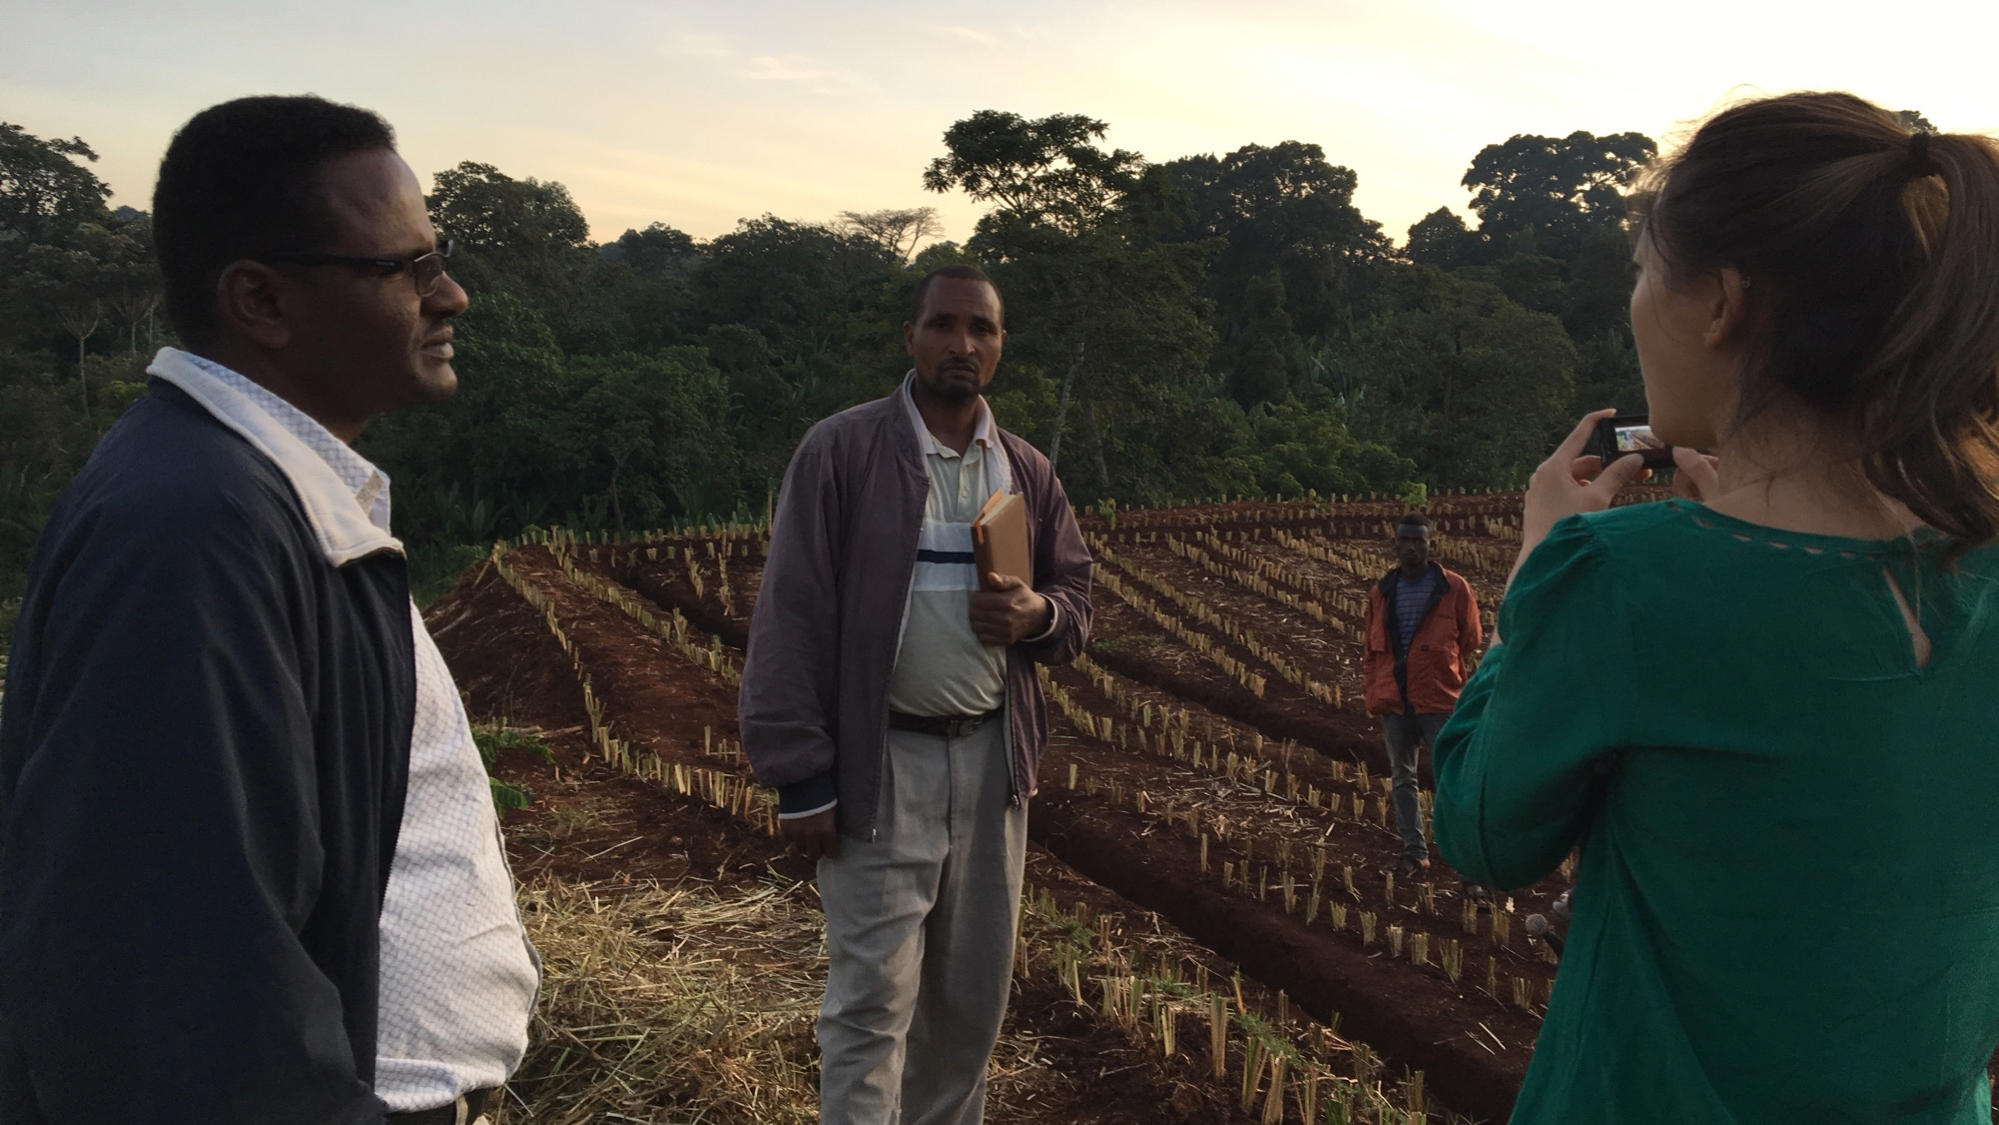 Photo of Ariana Day Yuen in Ethiopia. Ariana started an agroforestry enterprise after serving as a TechnoServe Fellow.